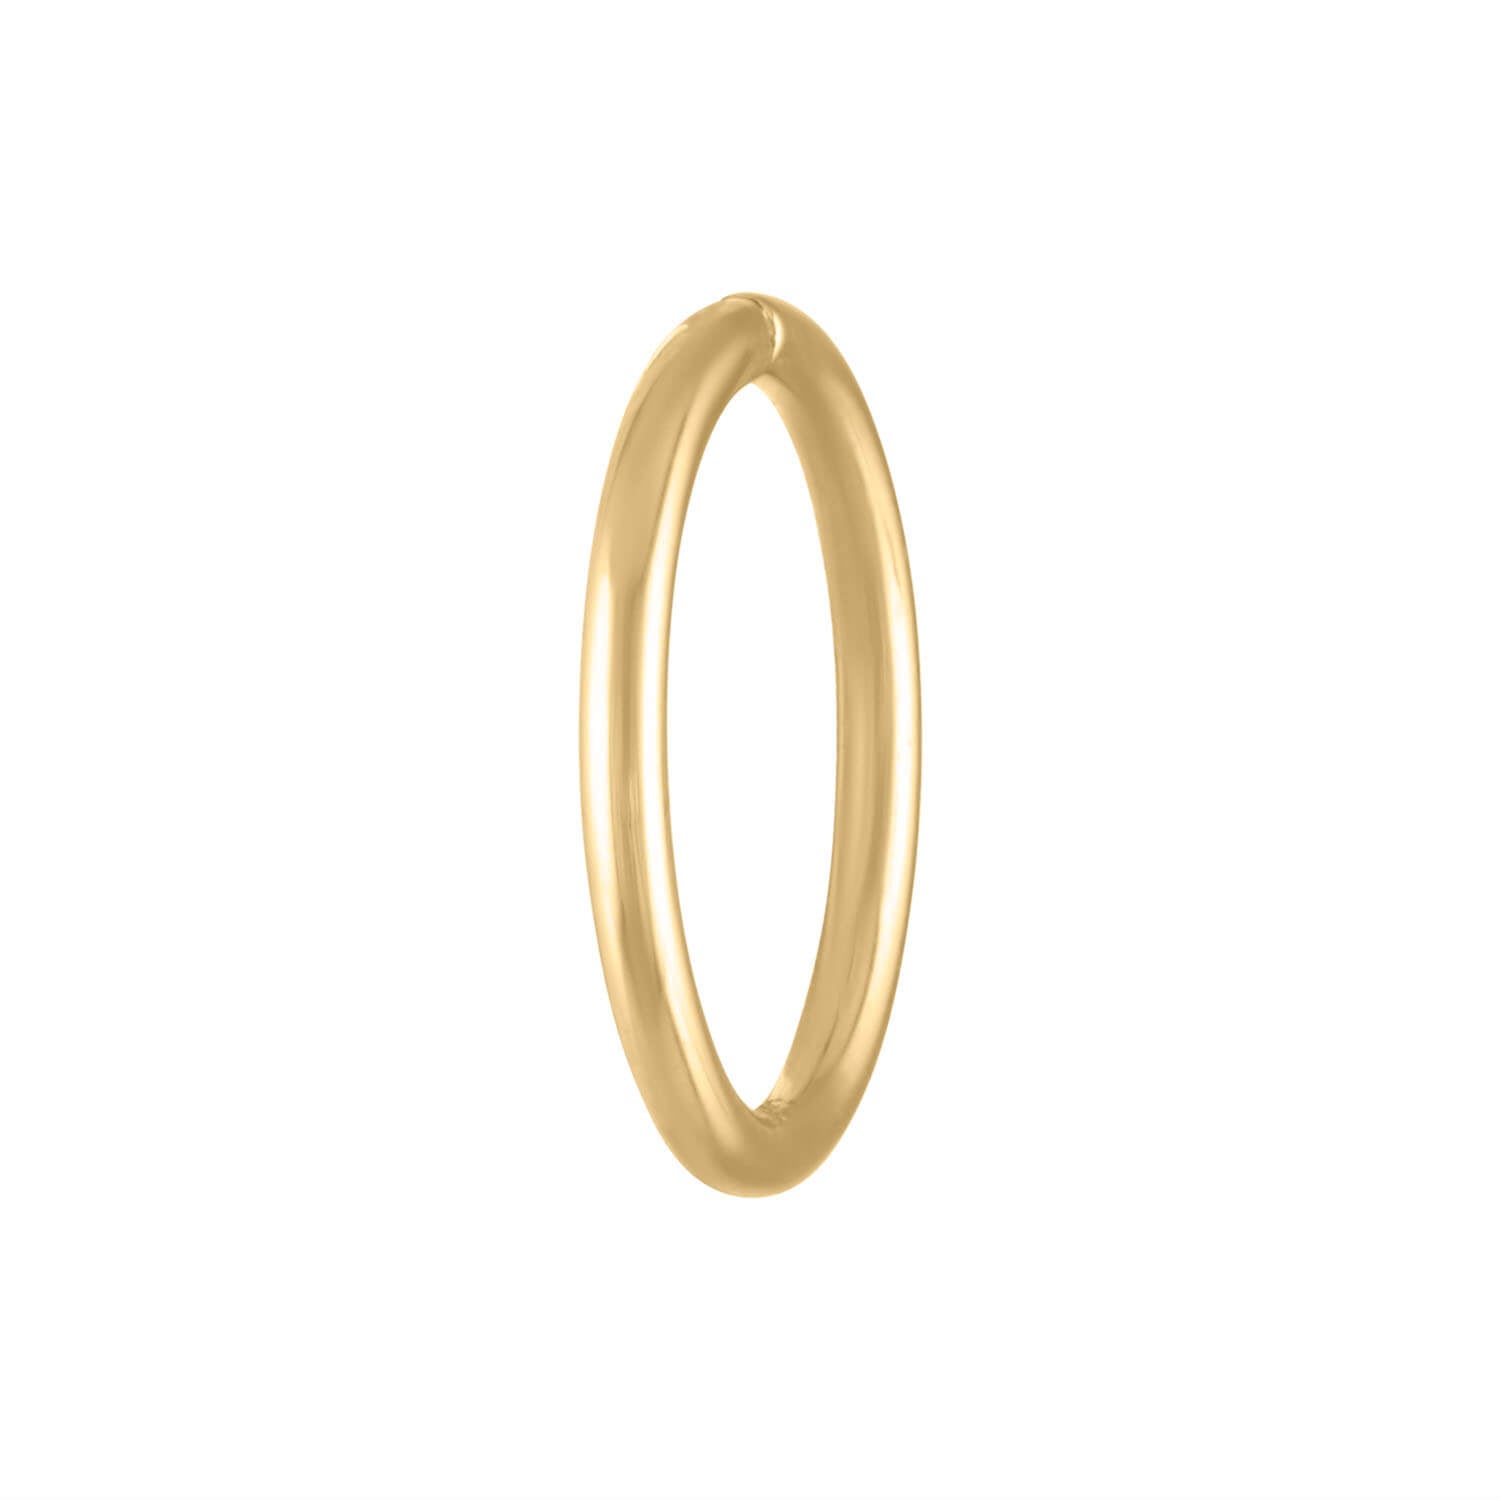 14K Gold Open Heart Seamless 16G Hinged Clicker Ring - Daith, Rook, Helix